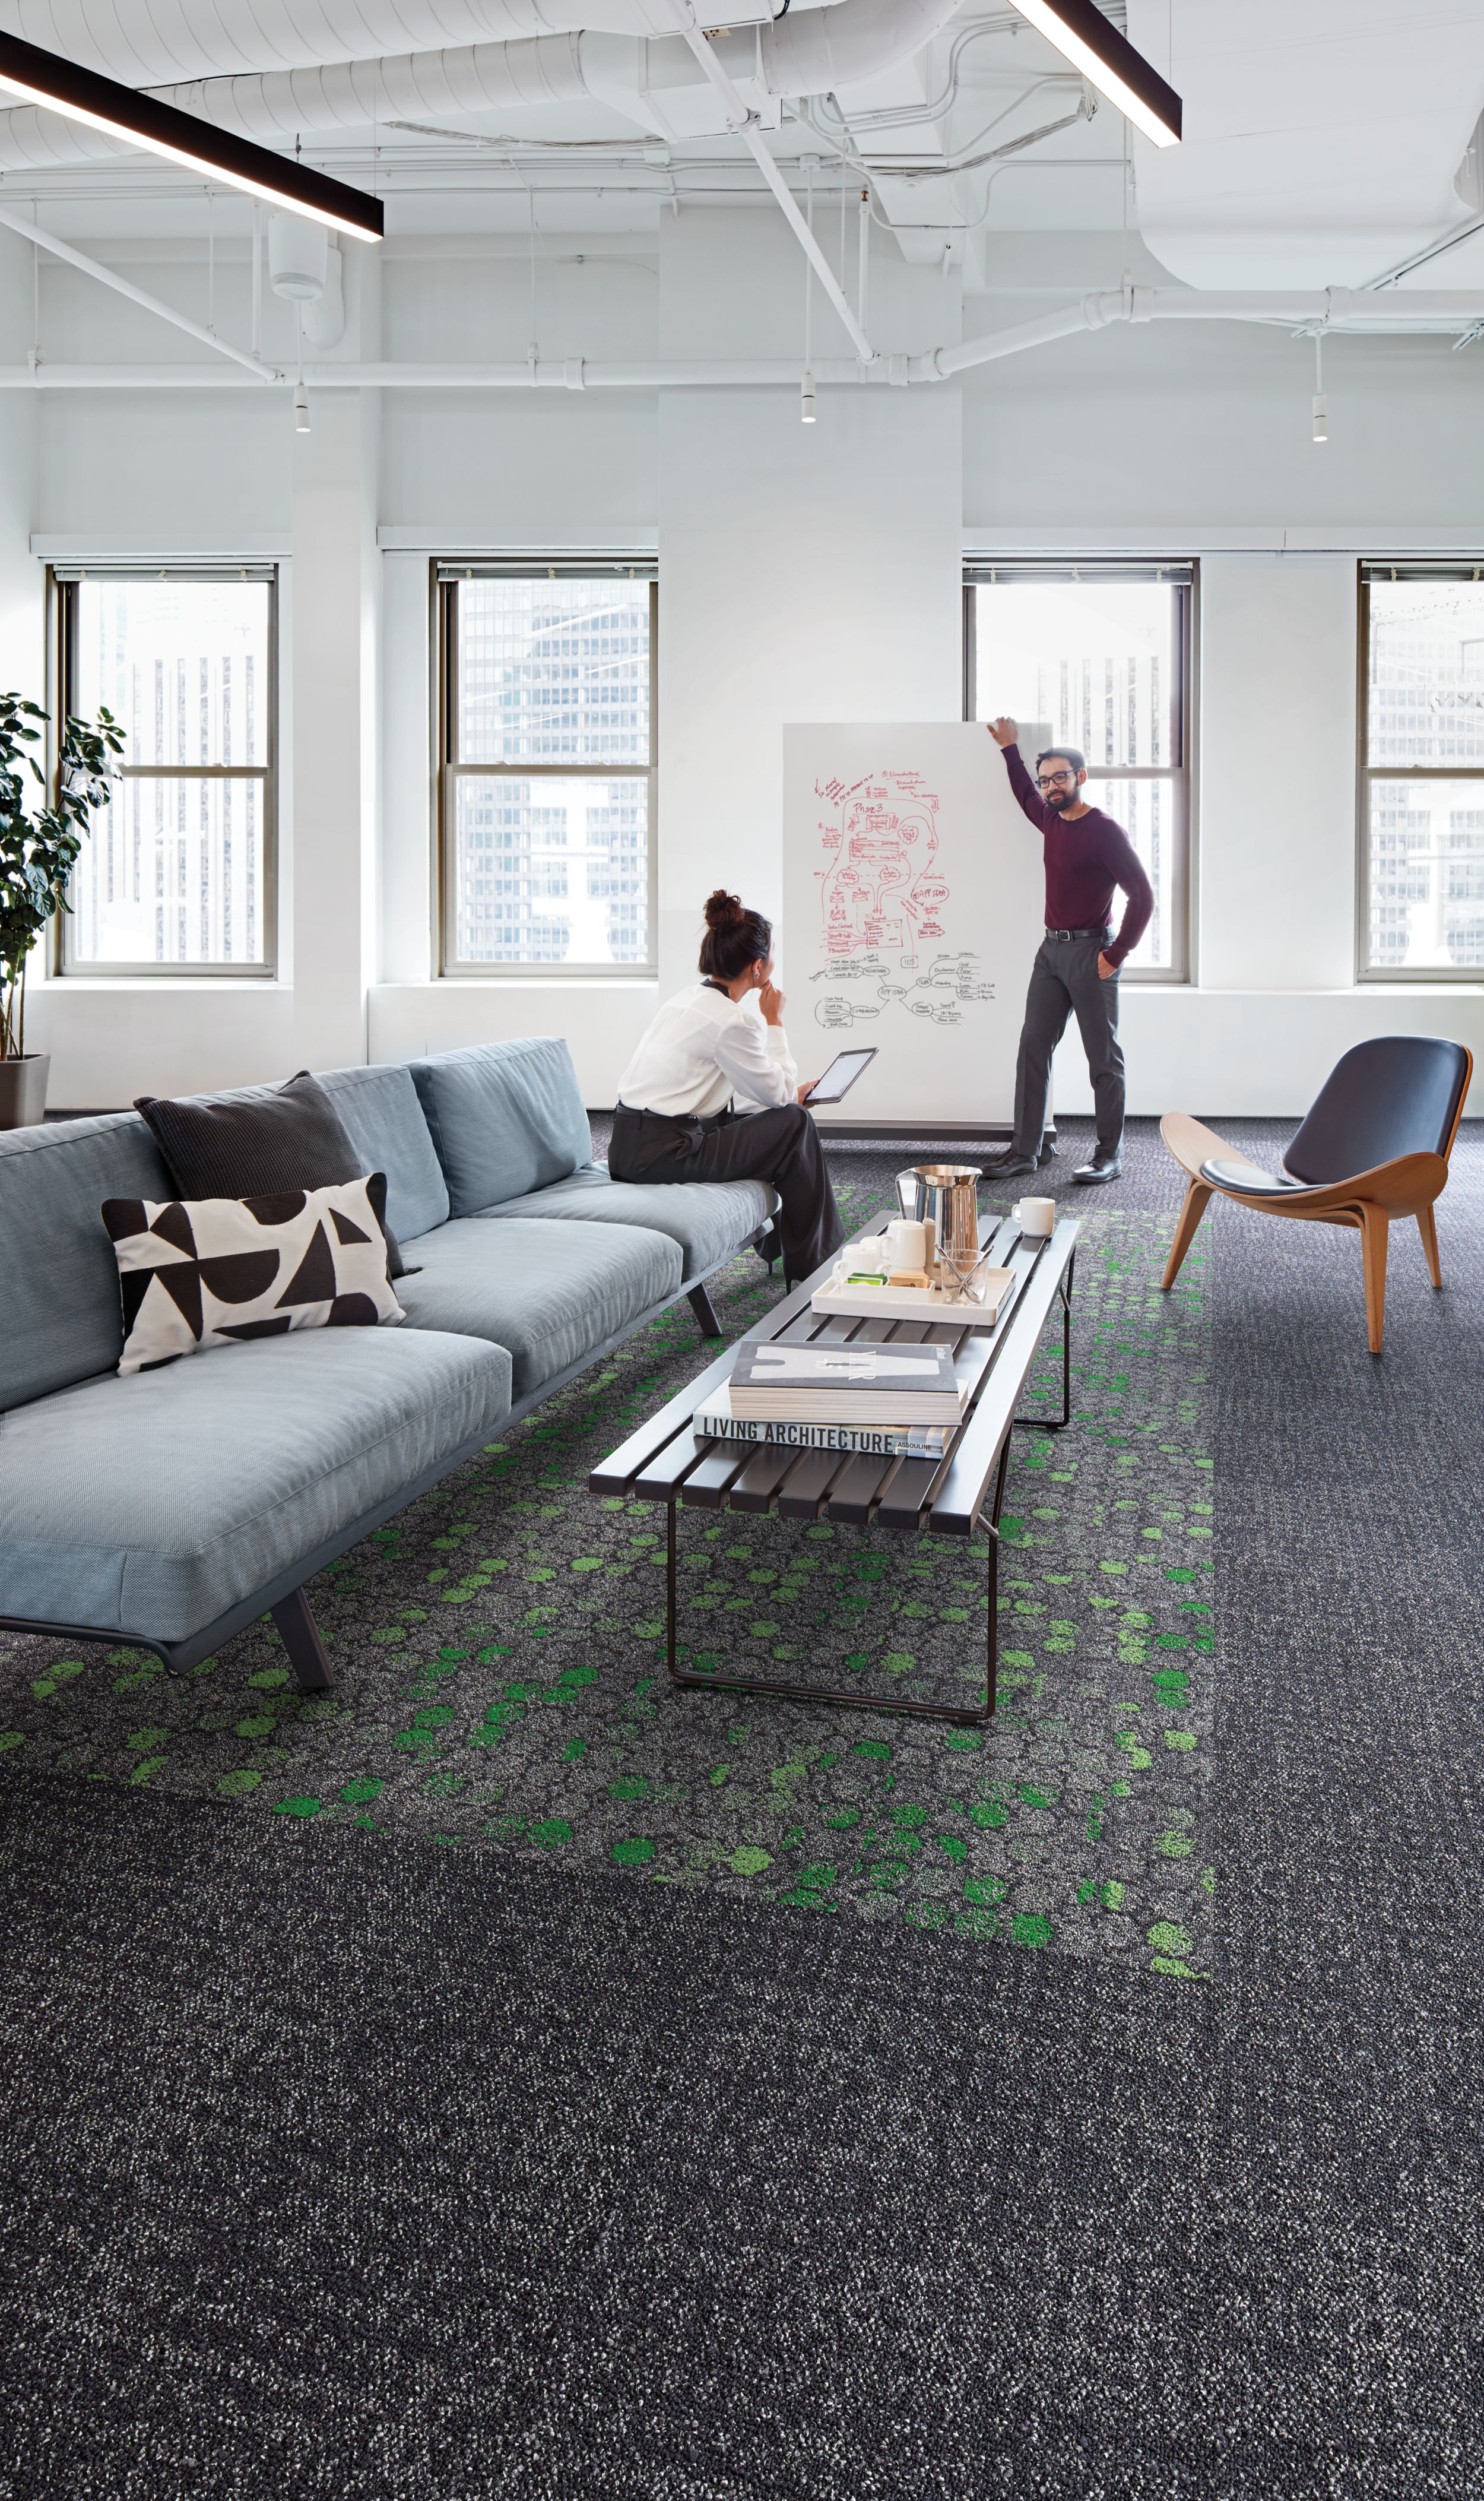 Interface Broome Street and Wheler Street in open office area with people número de imagen 5